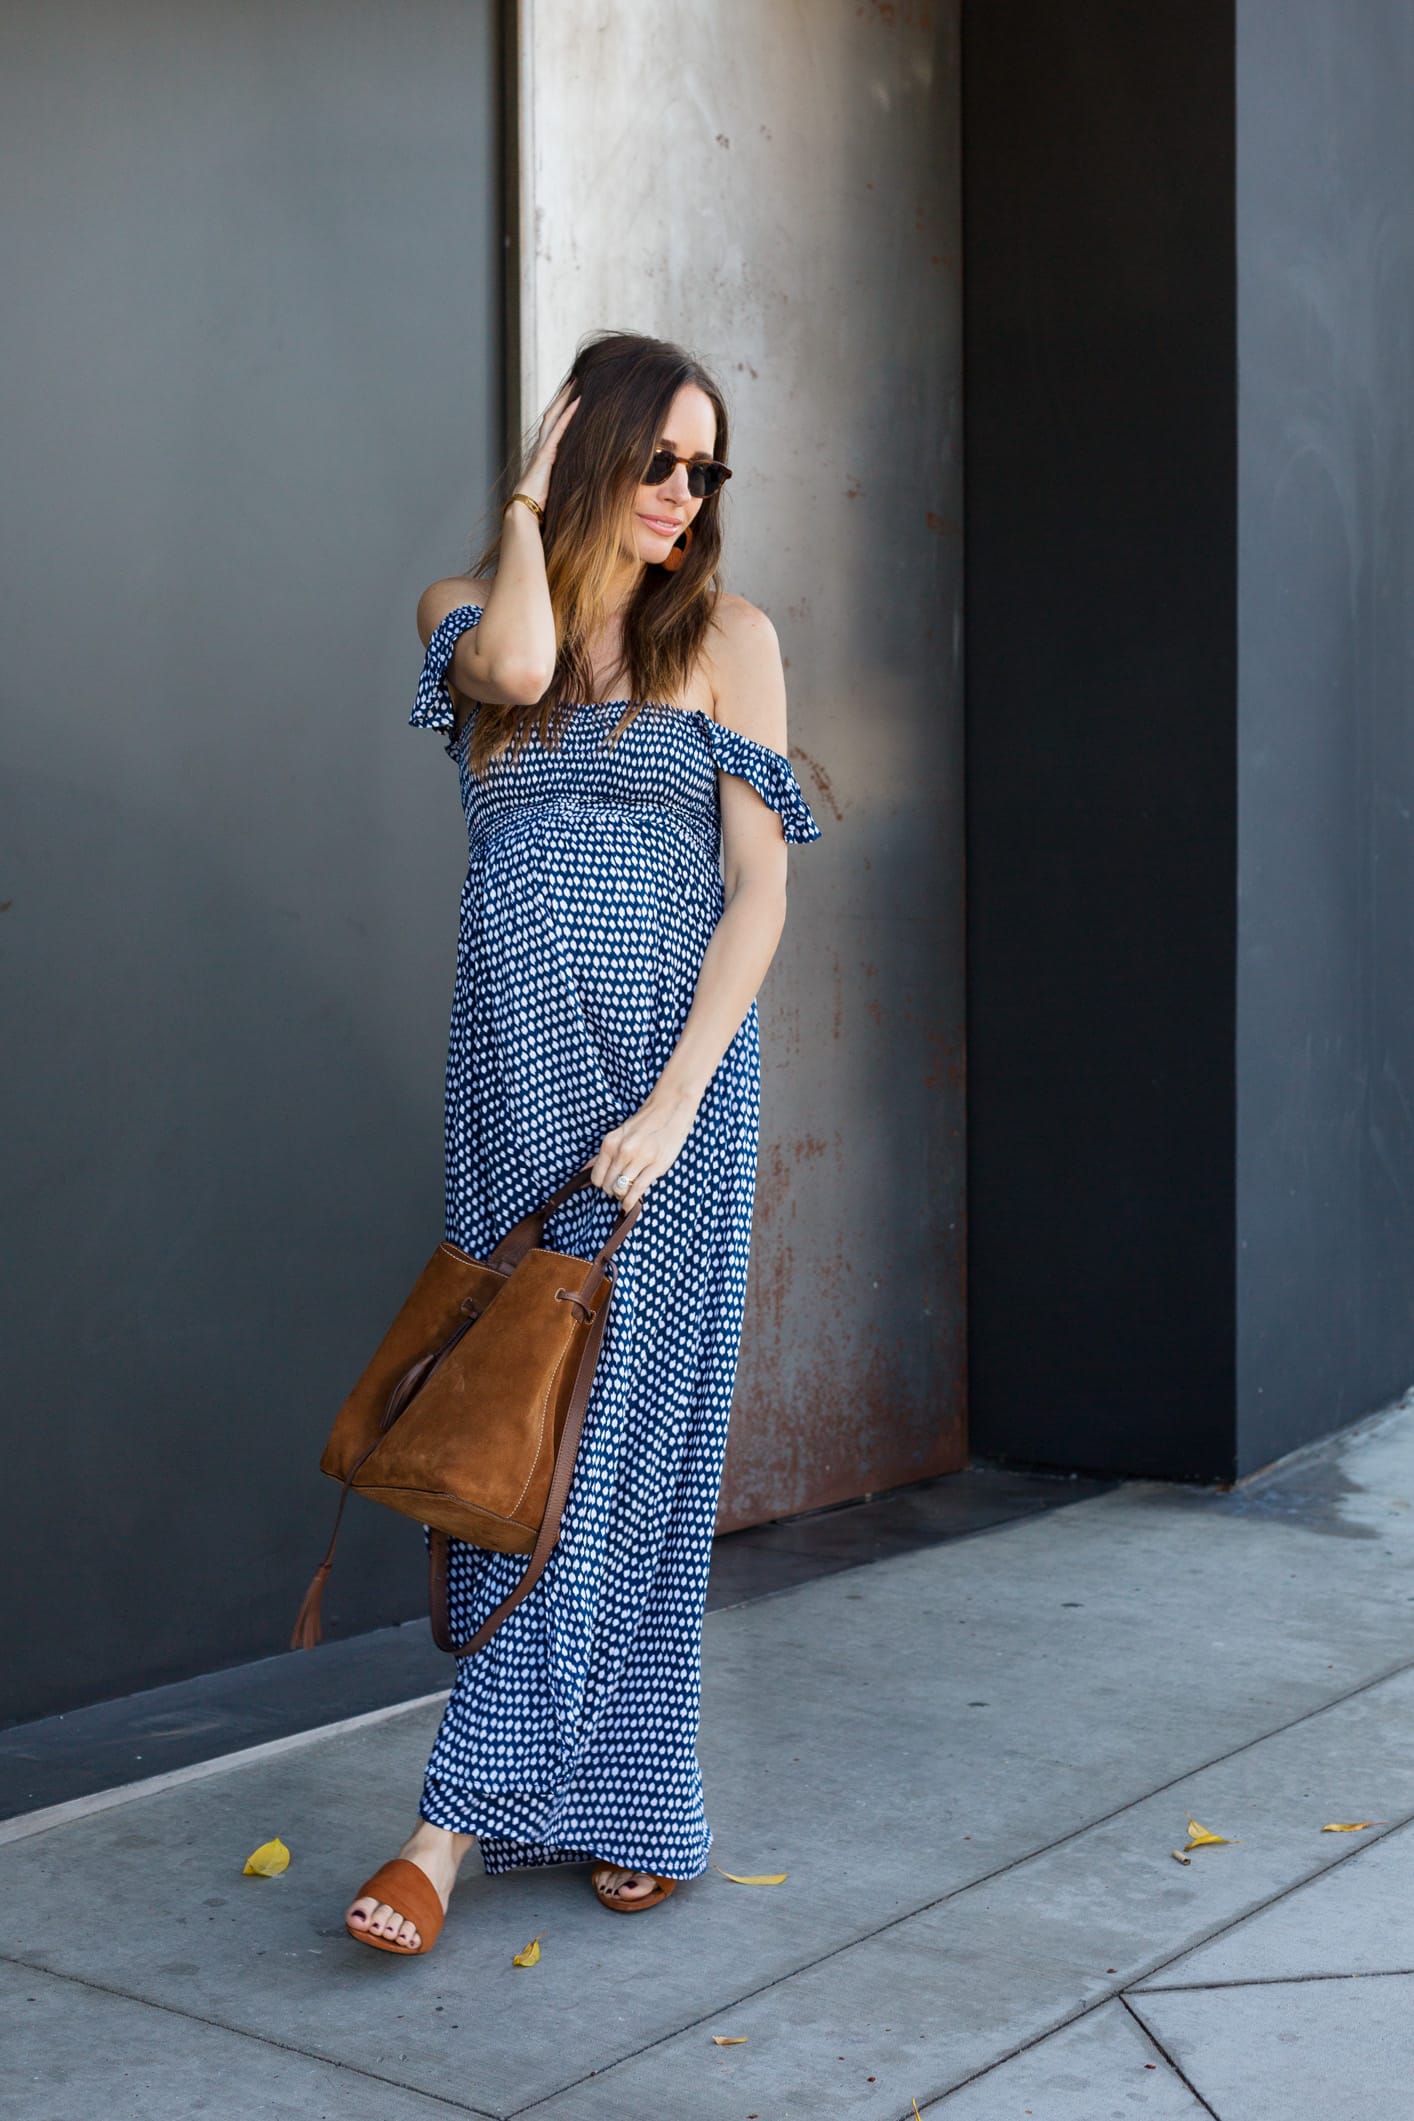 Louise Roe Wearing Blue Maxi Dress and Tan Accessories Transitional Fall Outfit